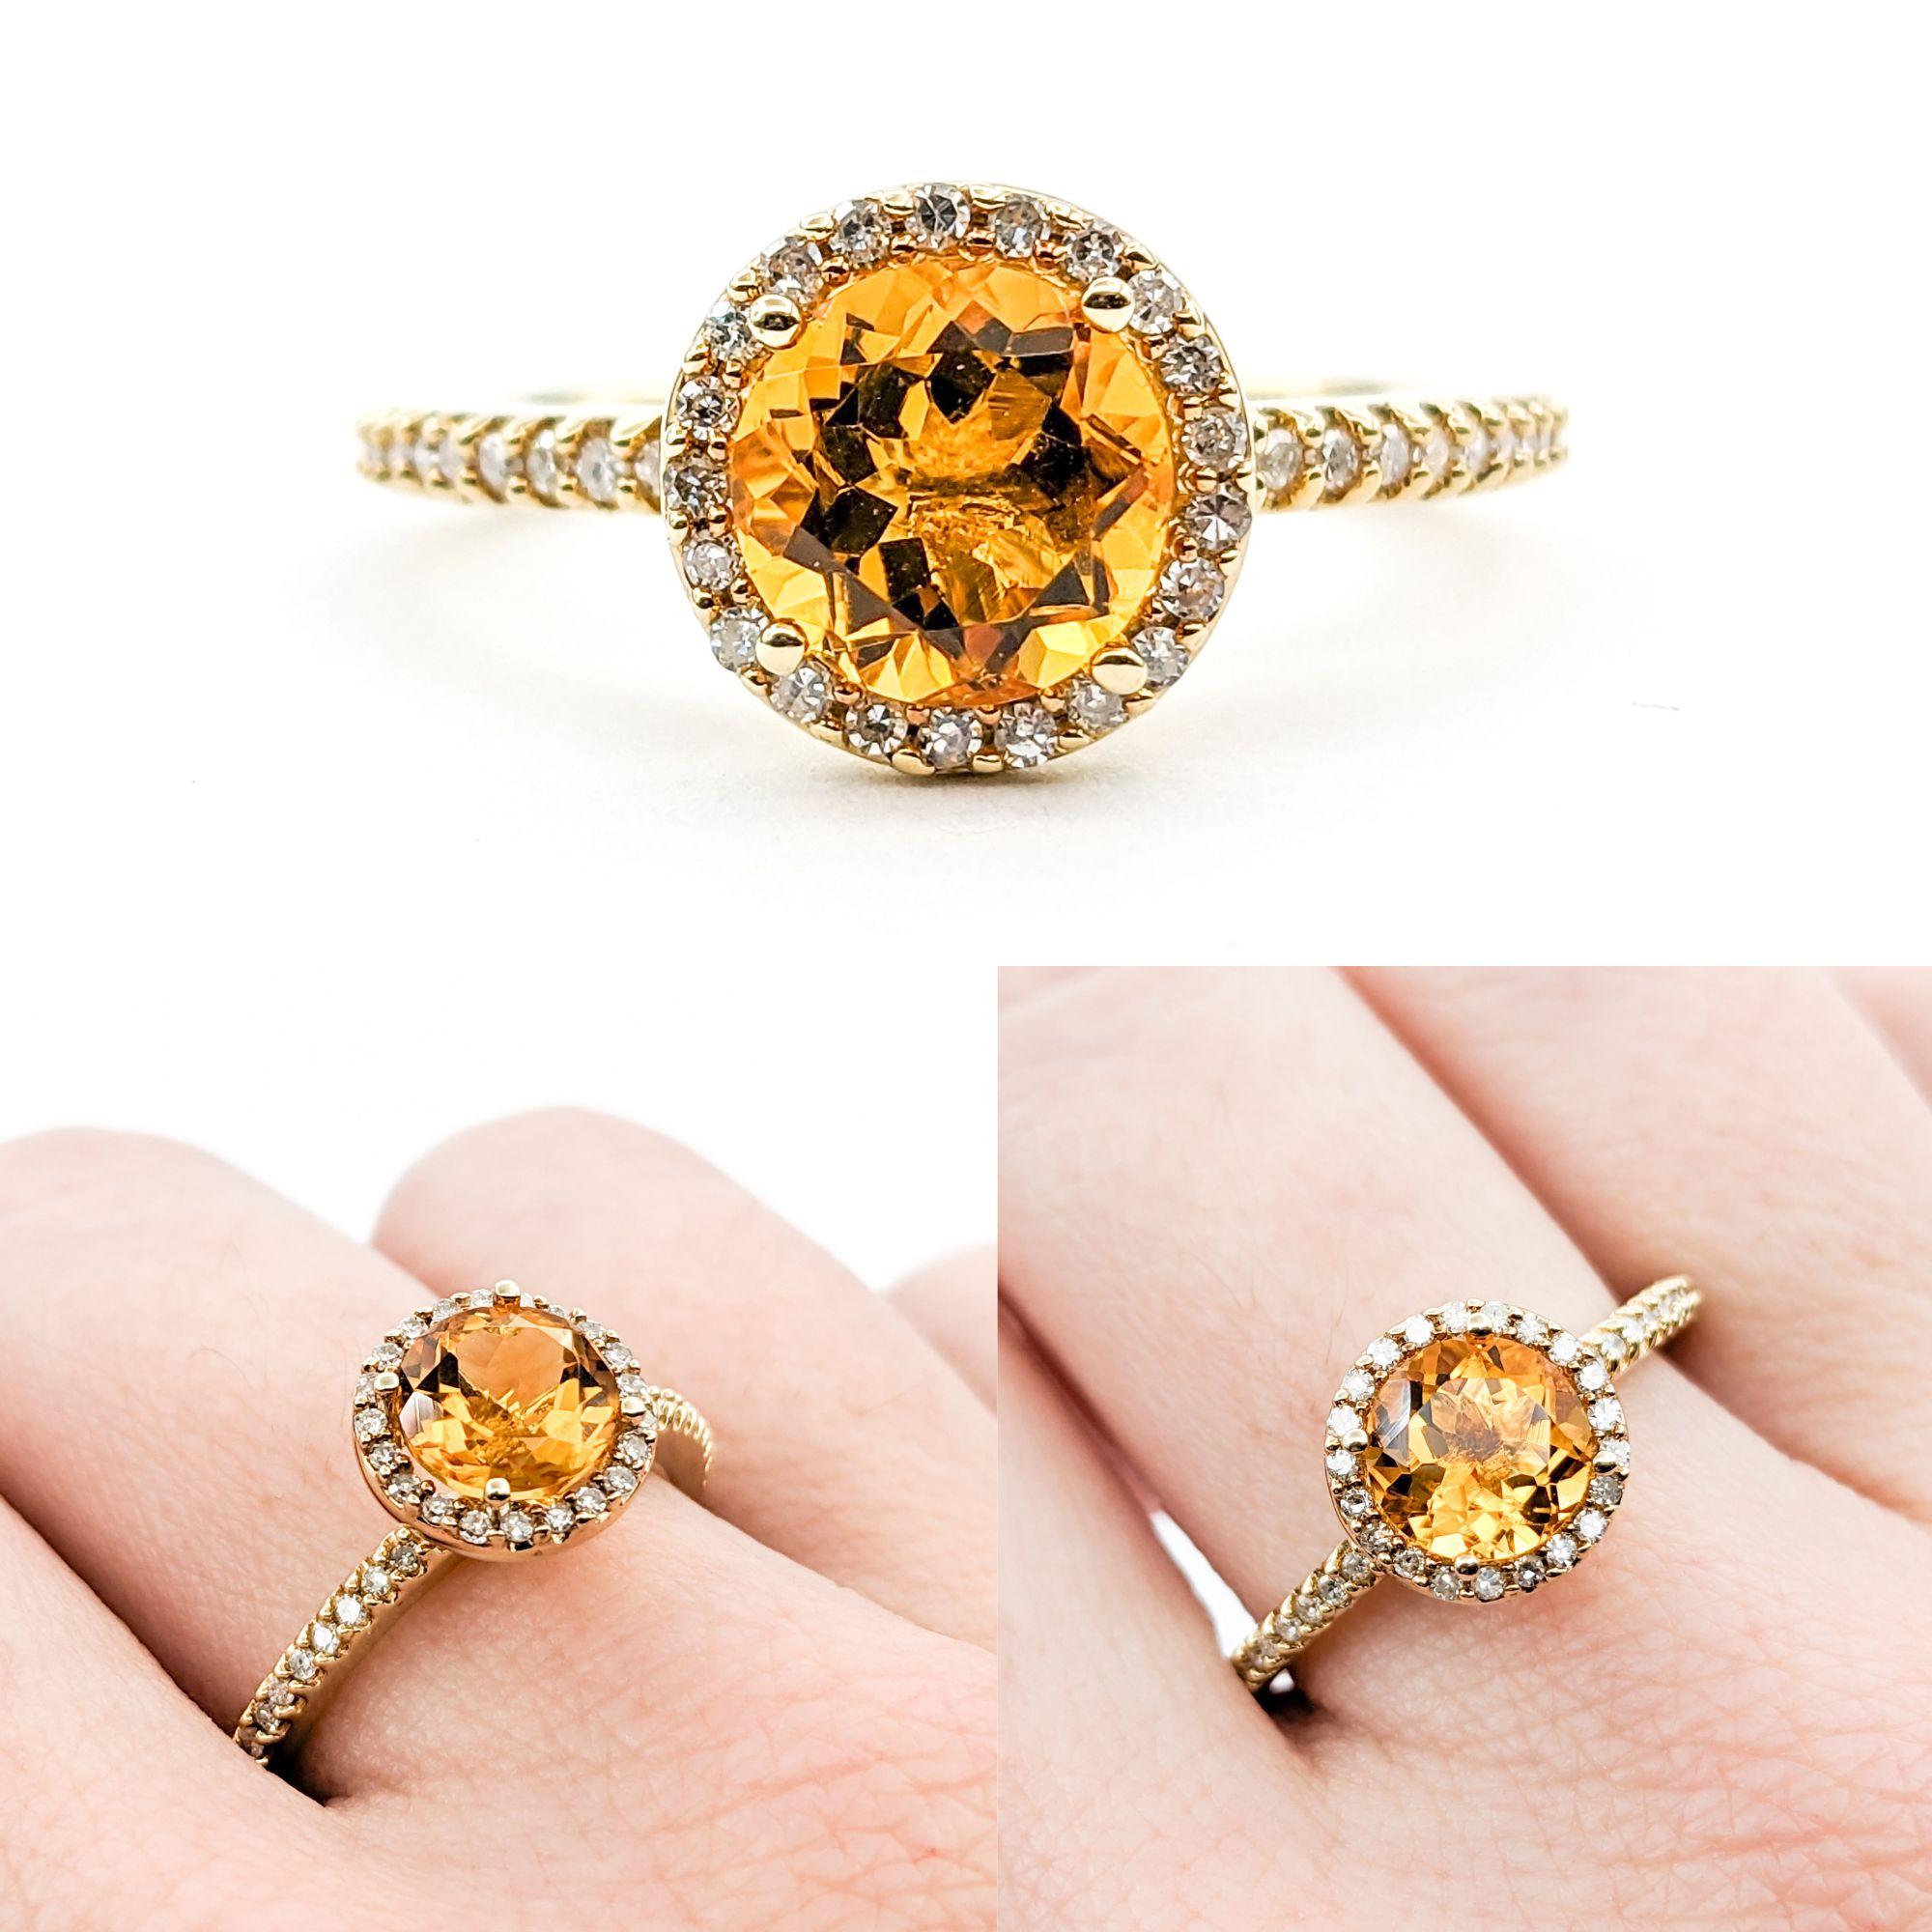 Effy Citrine & Diamond Halo Ring in Yellow Gold

This stunning Effy Citrine ring is expertly crafted in 14k yellow gold, embodying both luxury and timeless design. This timeless design features a lovely 1.20ct round citrine, its rich golden hue